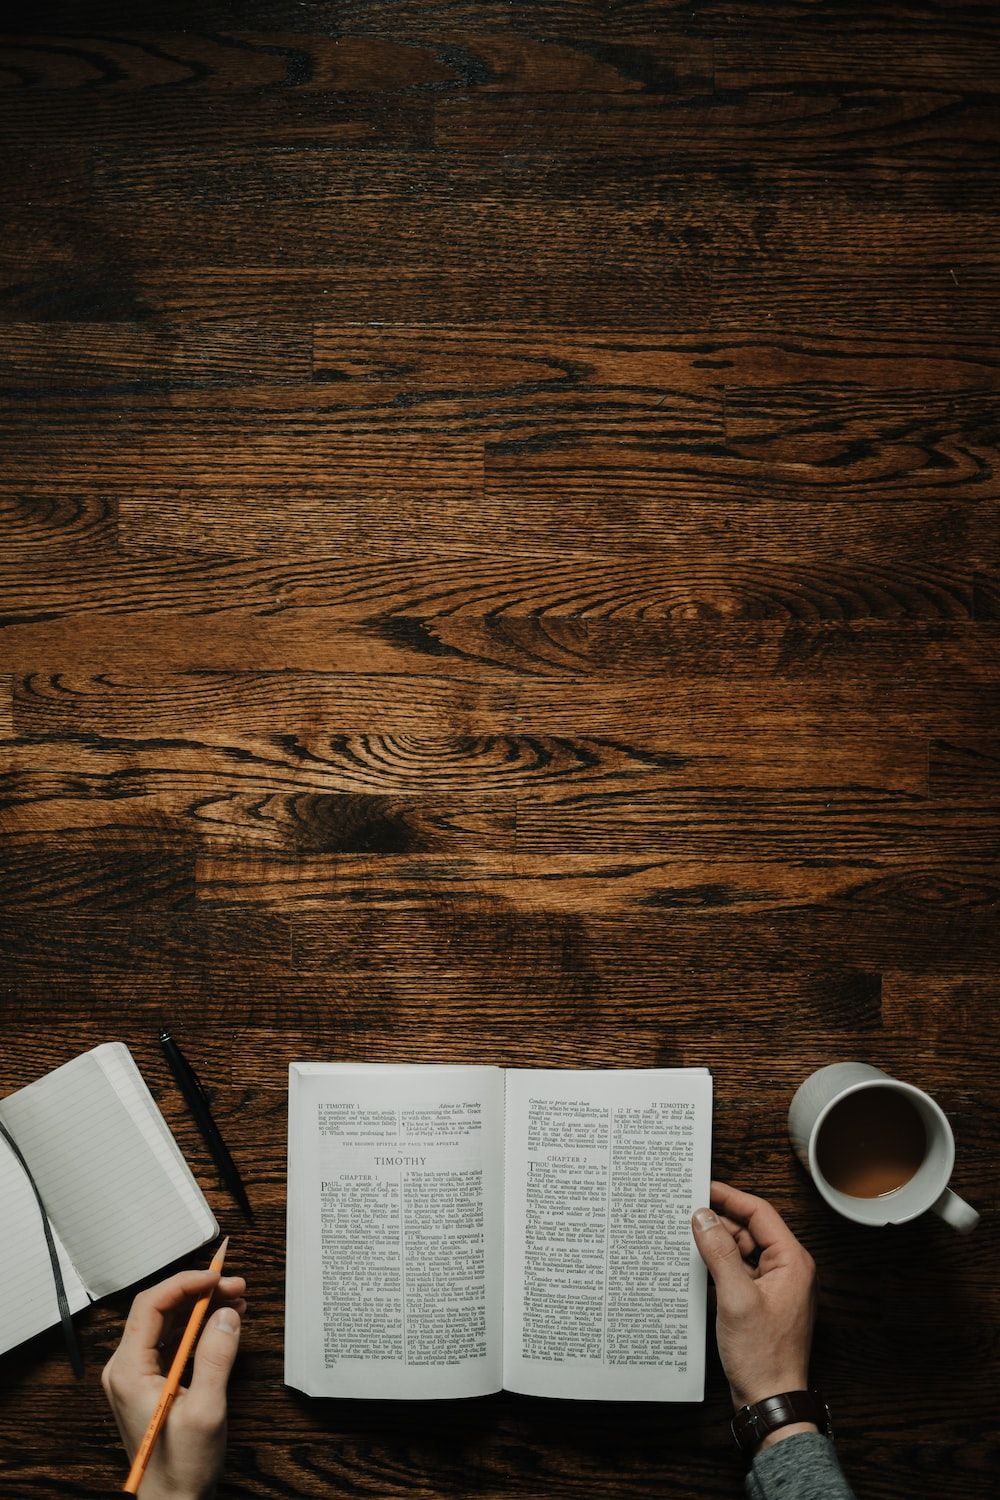 Person reading a book on a wooden table with a cup of coffee and a notebook. - Study, Bible